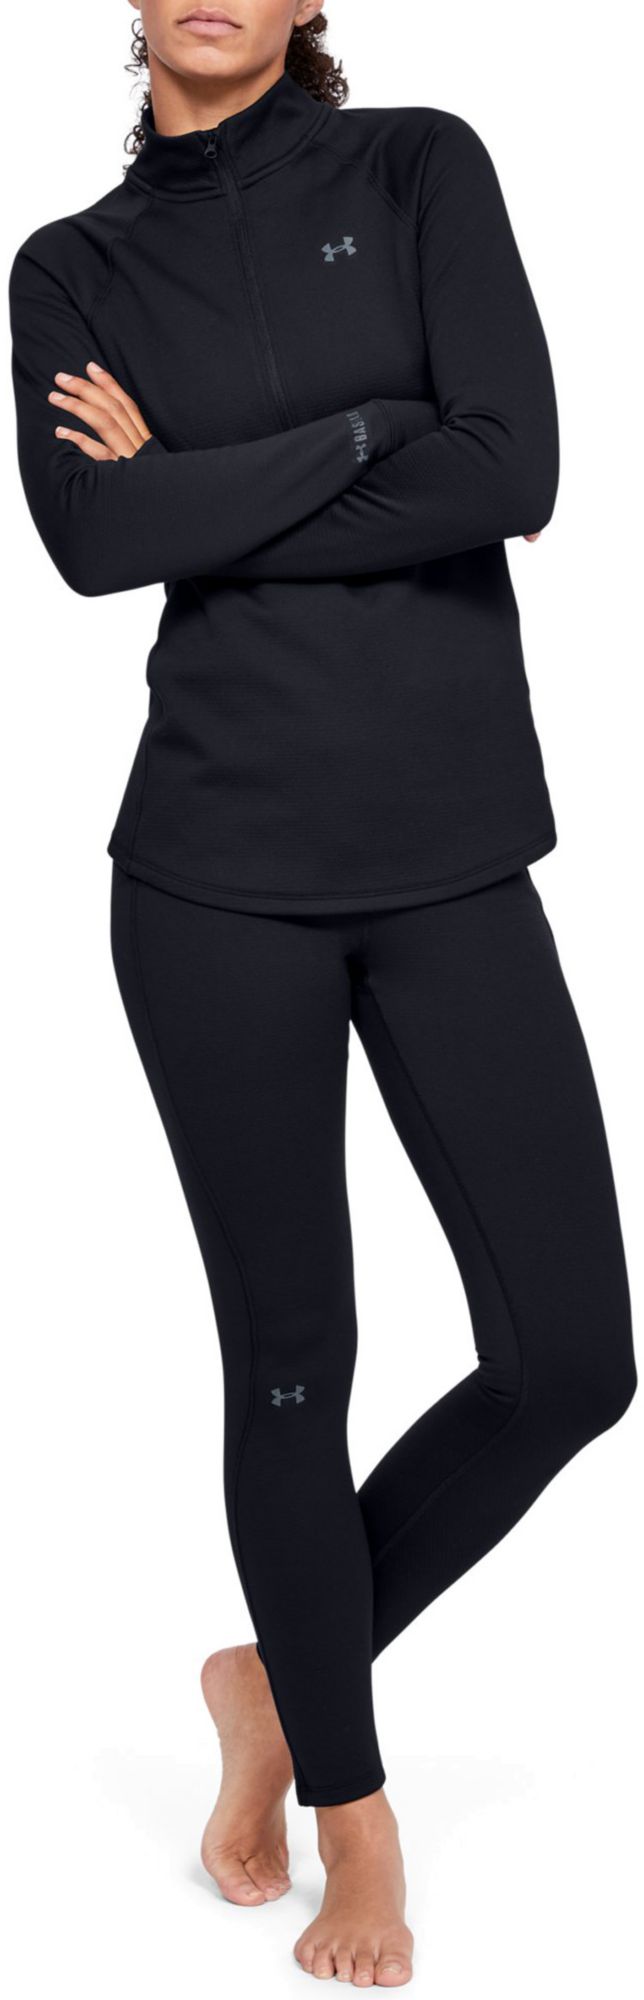 Dick's Sporting Goods Under Armour Women's Base 4.0 Baselayer